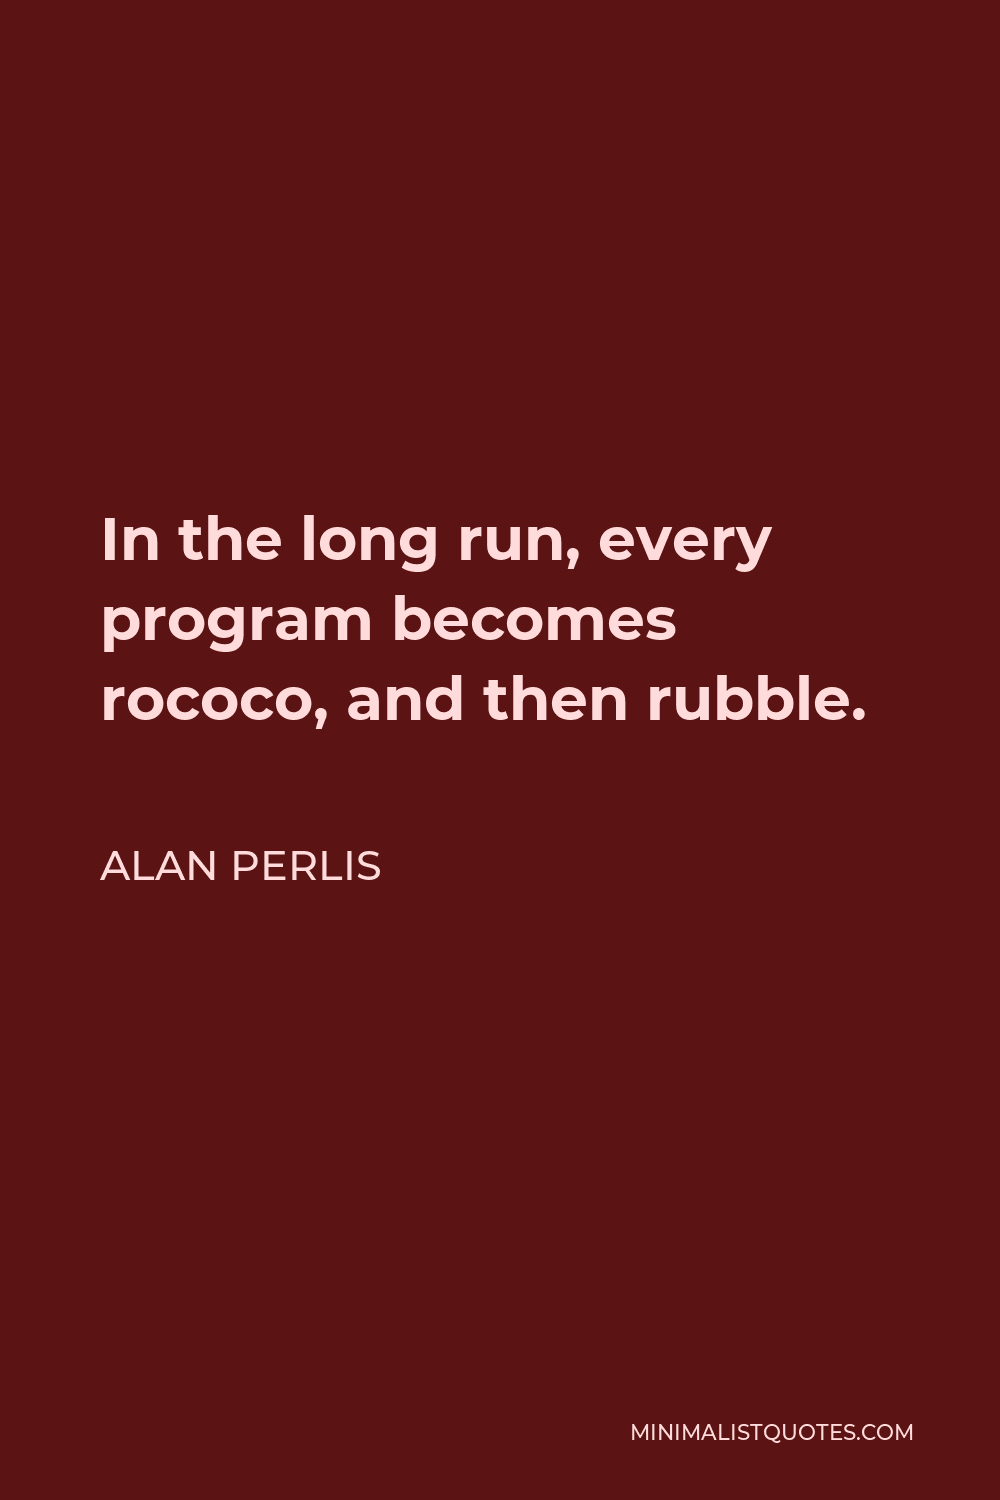 Alan Perlis Quote - In the long run, every program becomes rococo, and then rubble.